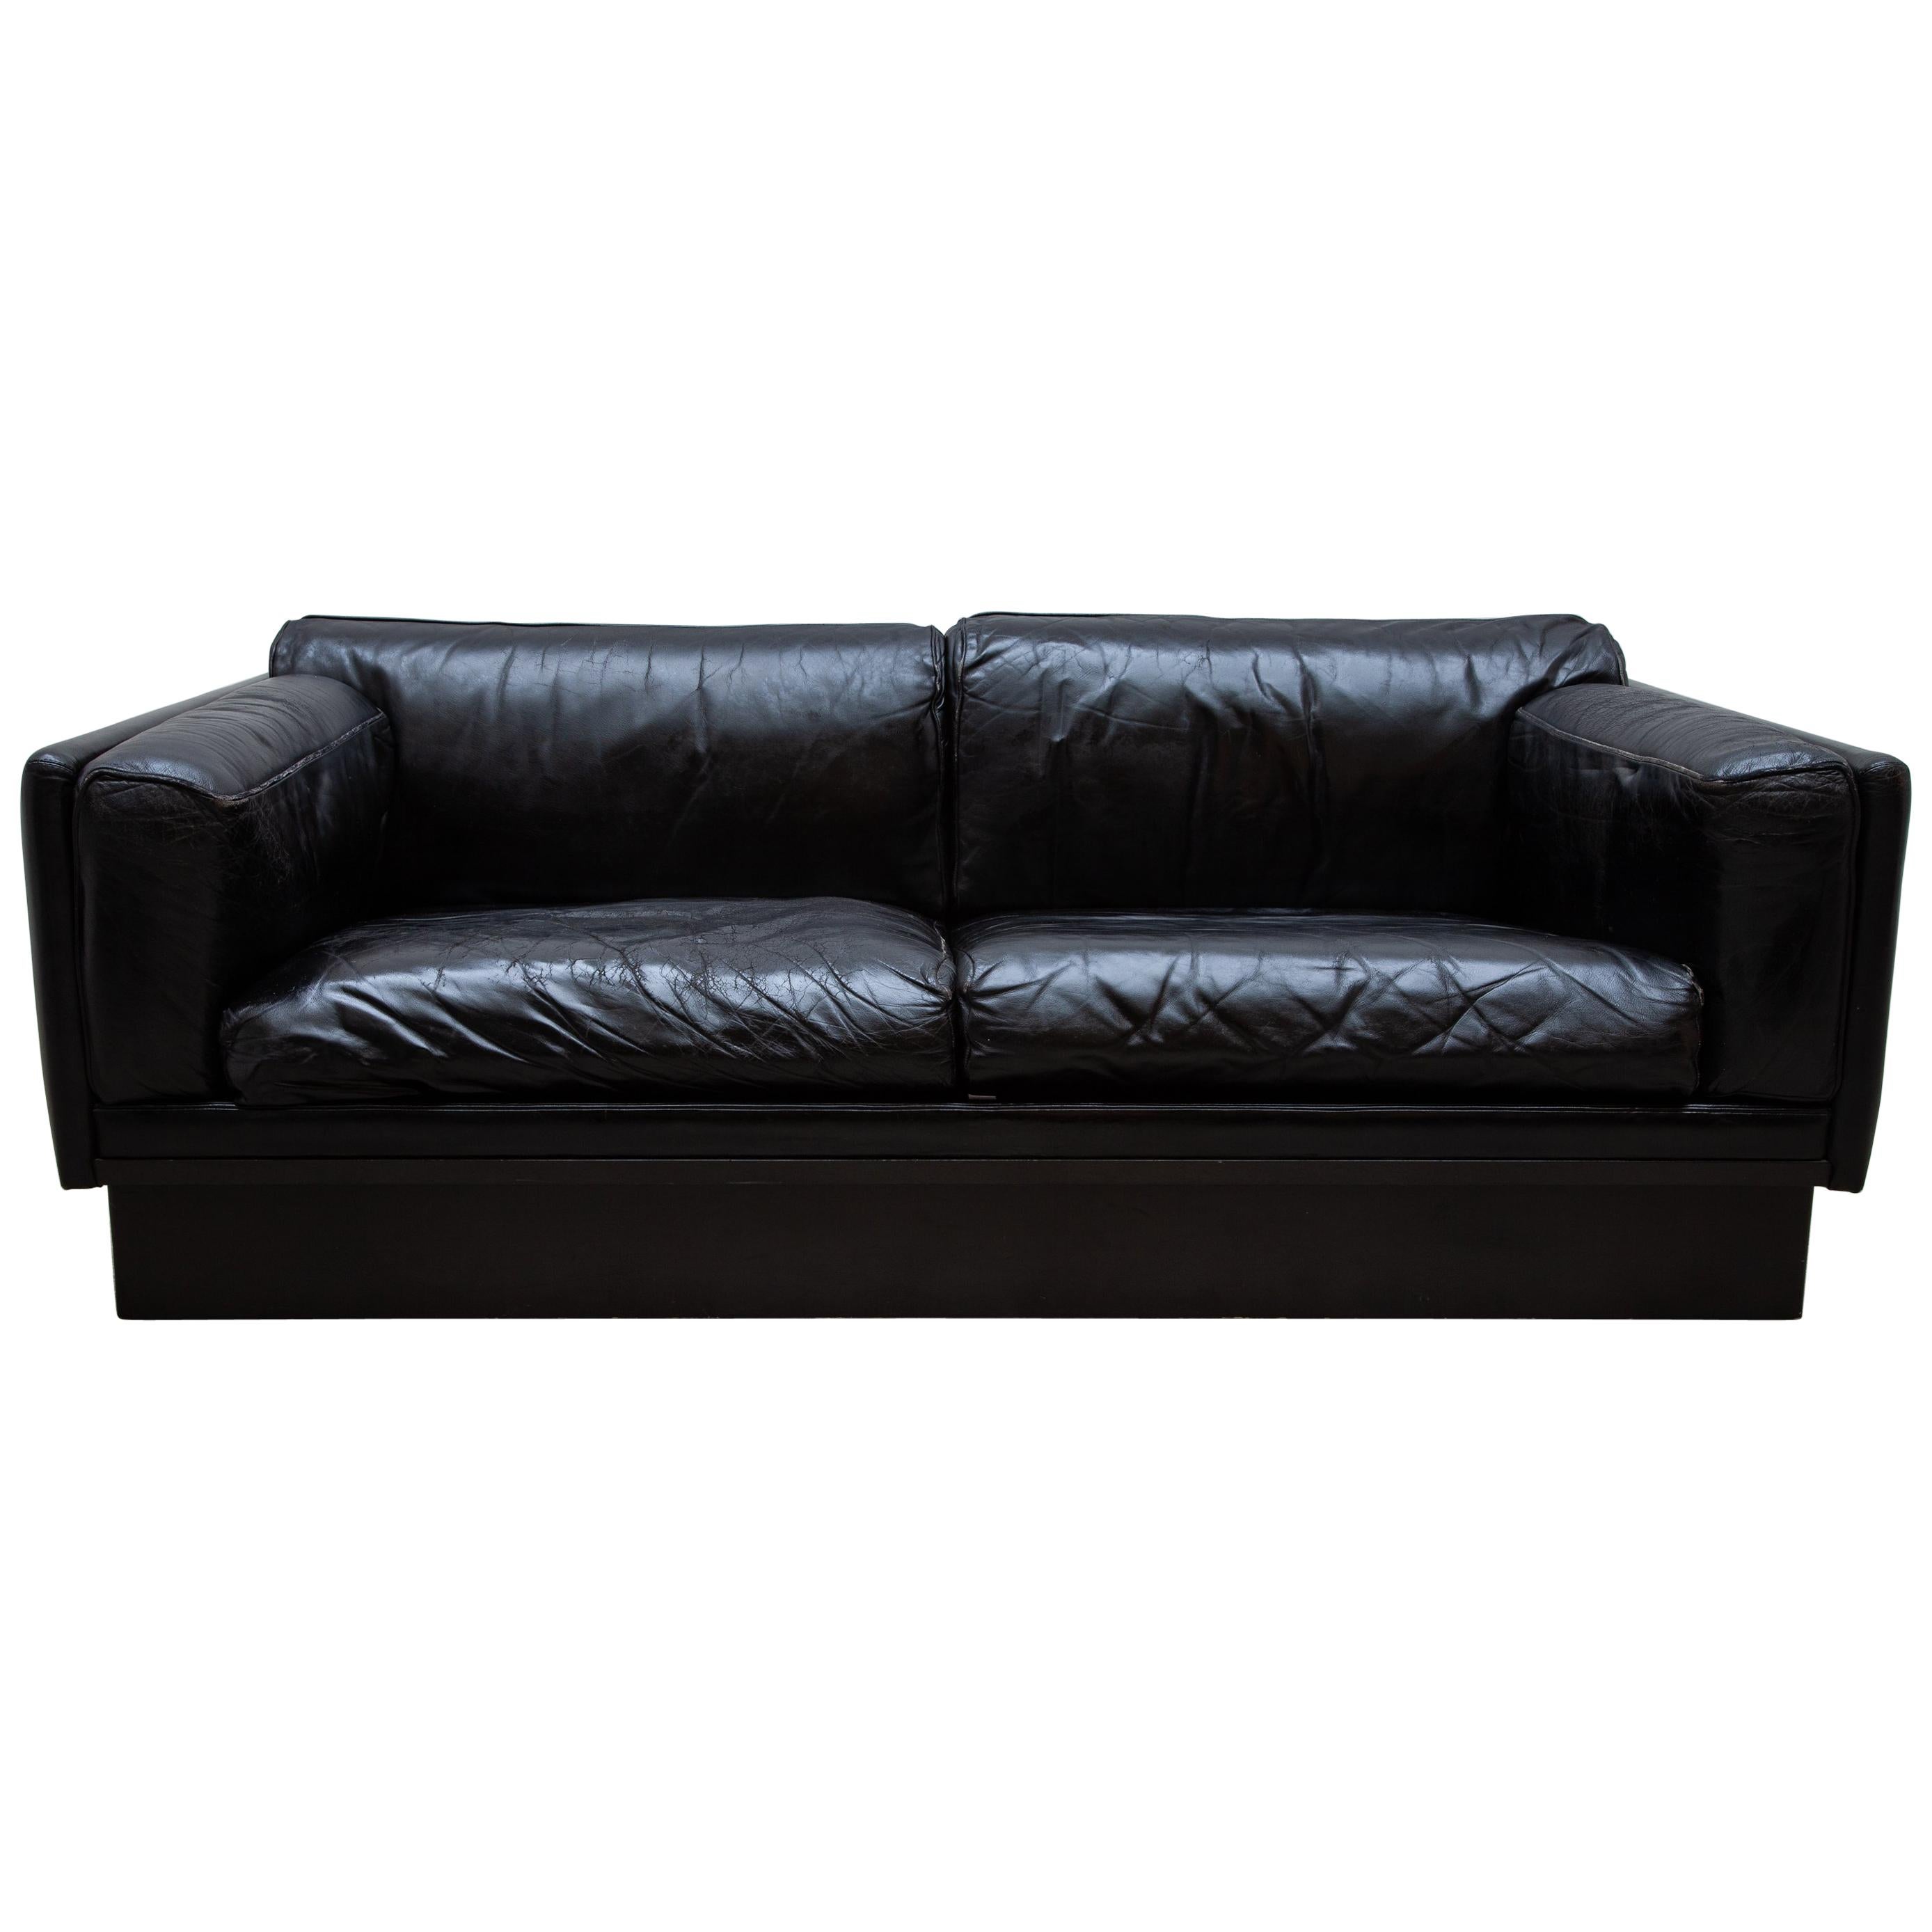 Durlet Black Leather Couche, Settees 1970s Made in Belgium.